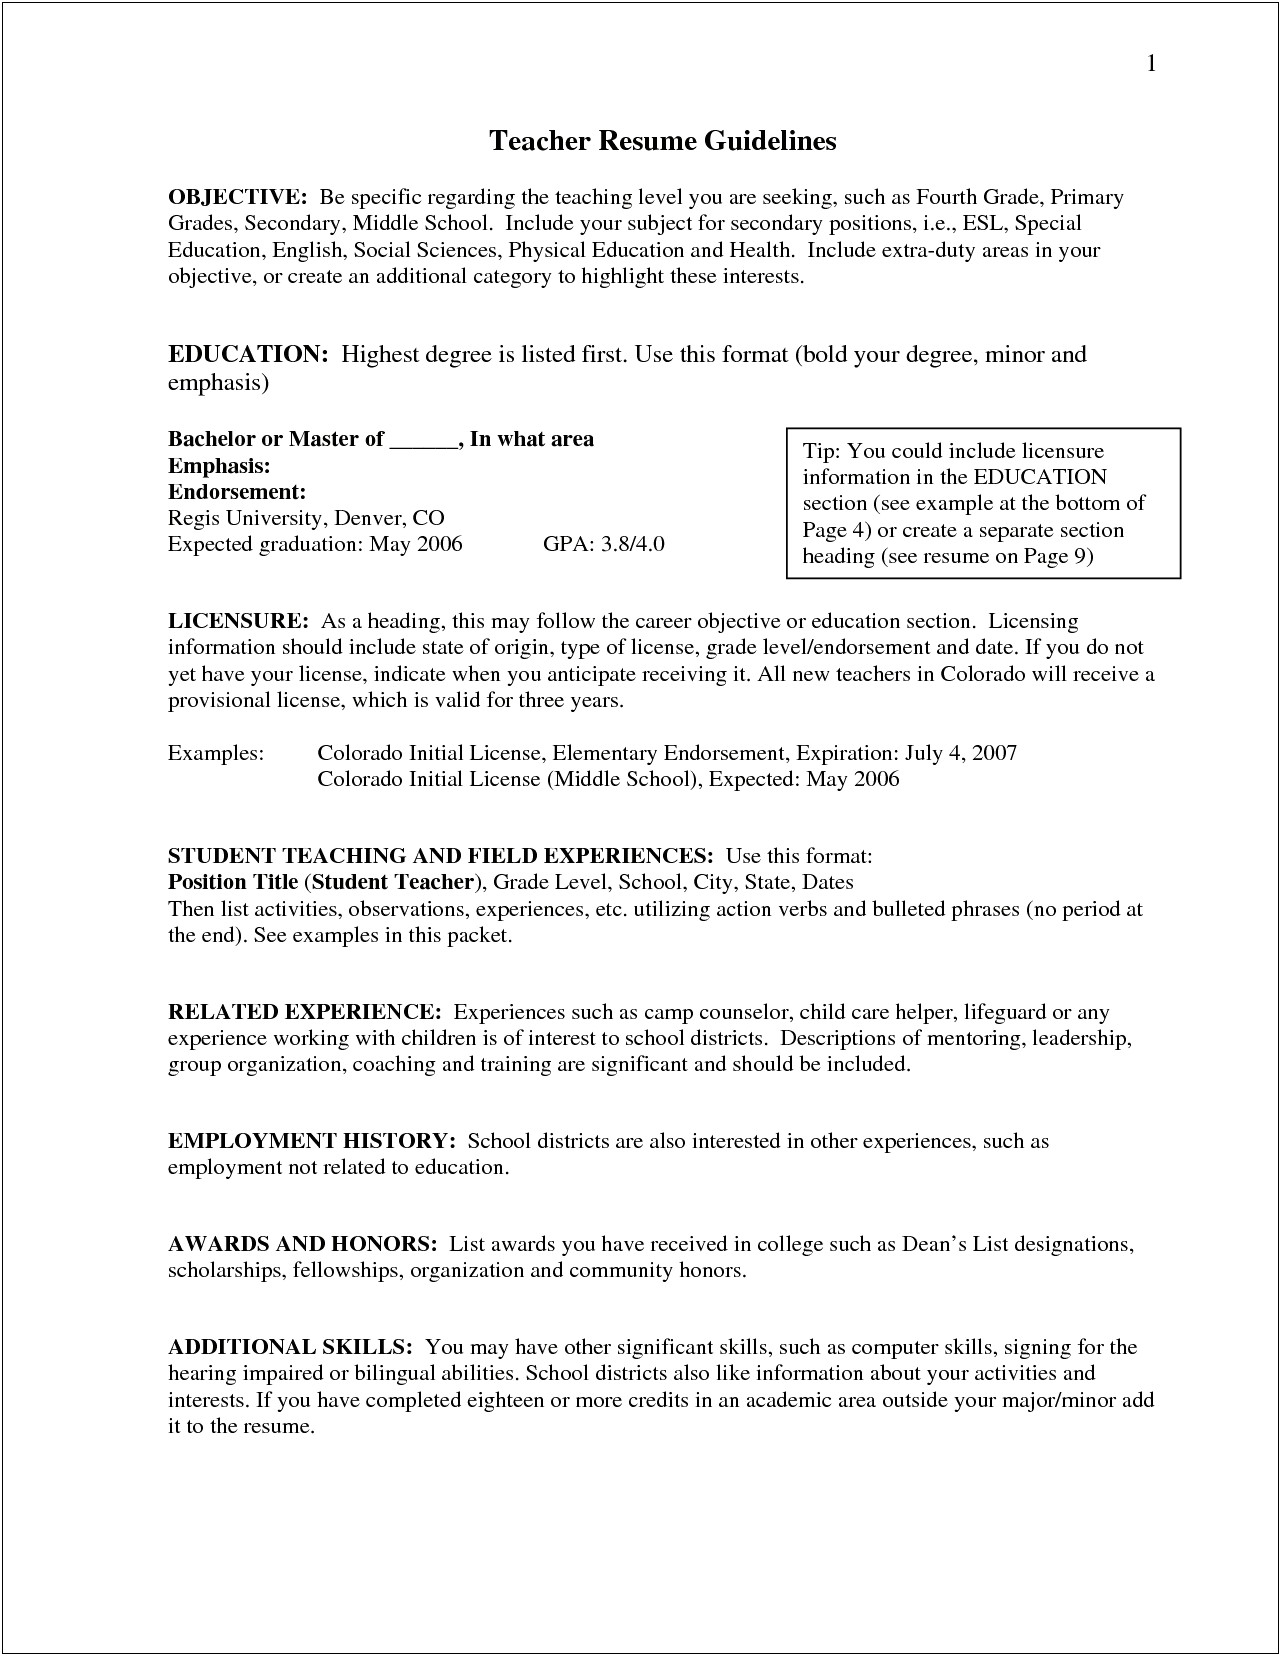 Do You Put Student Teaching On Resume